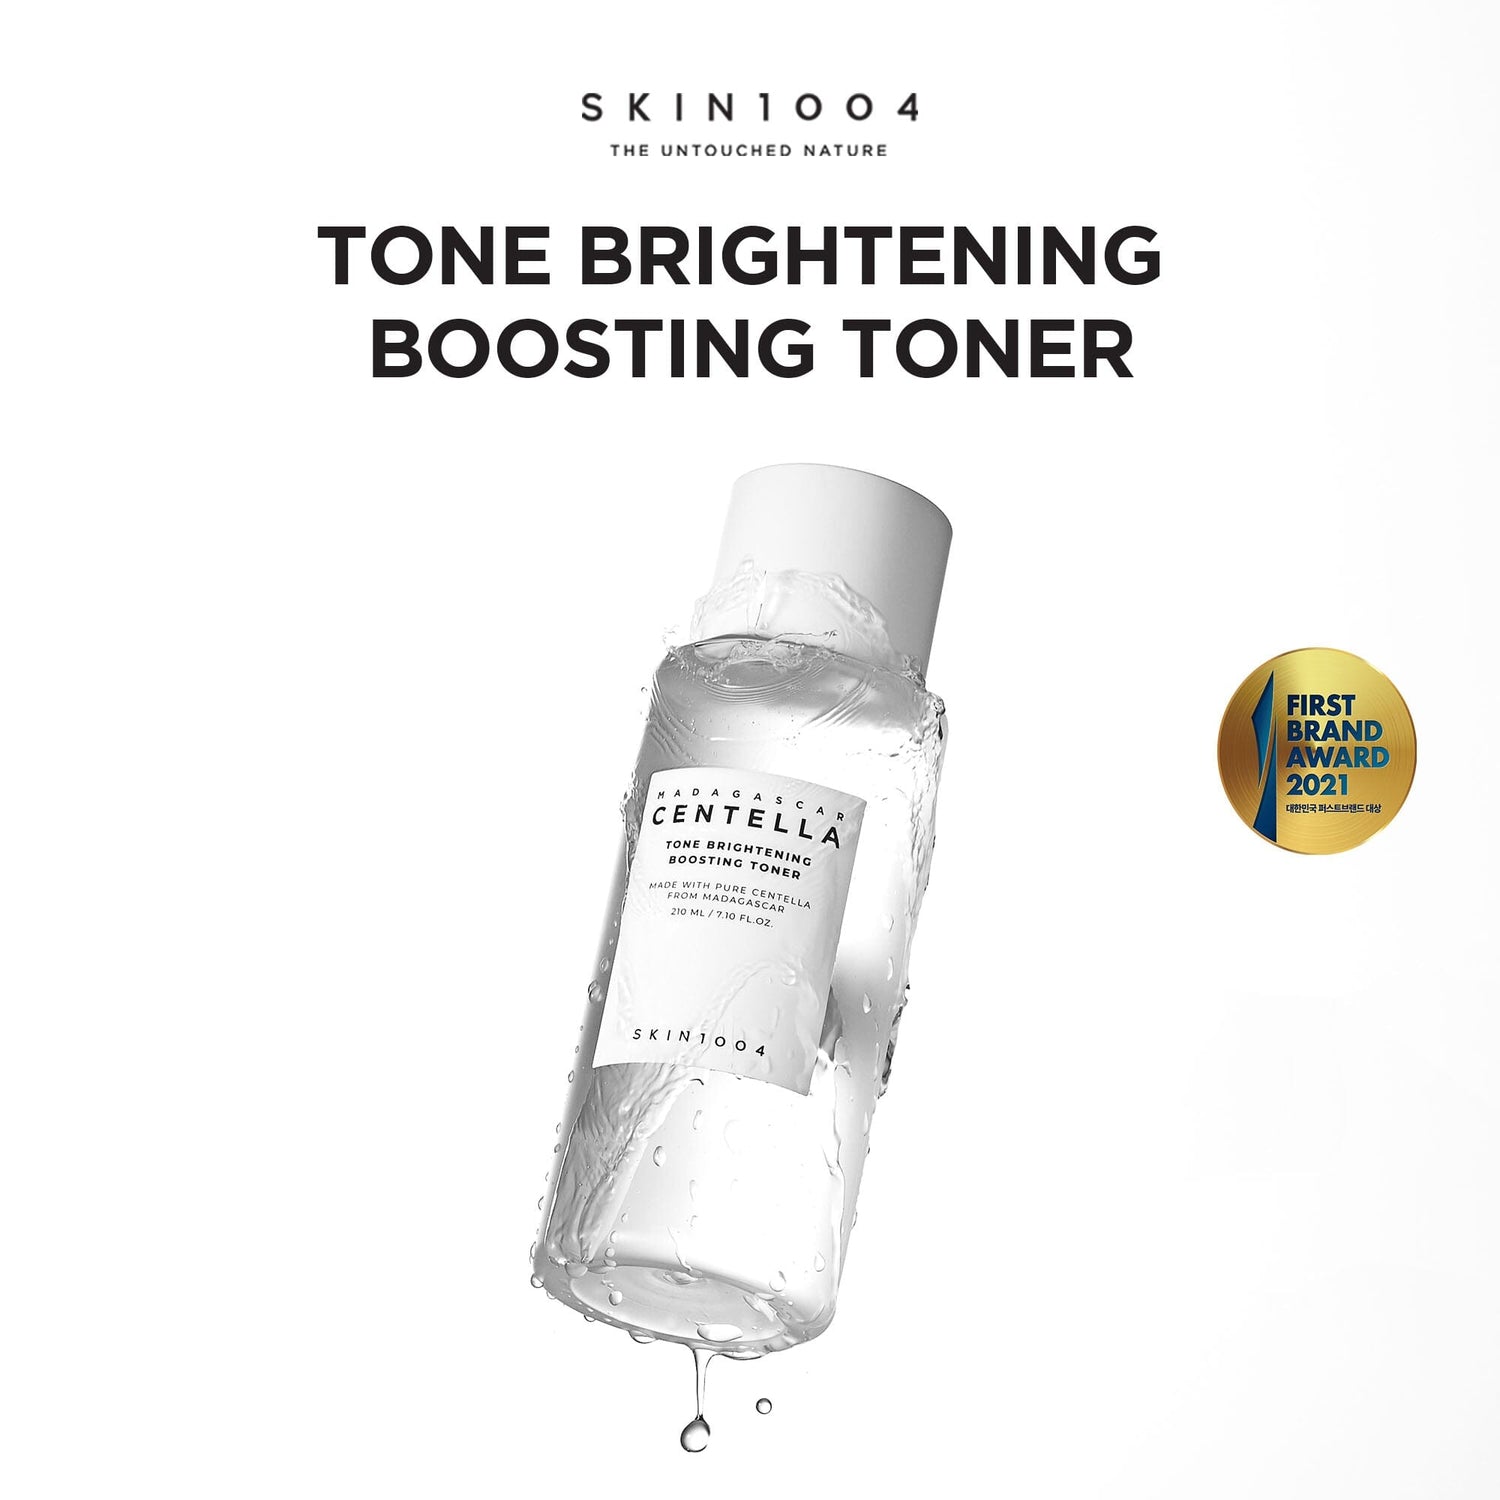 SKIN1004 Madagascar Centella Tone Brightening Boosting Toner 210ml, at Orion Beauty. SKIN1004 Official Sole Authorized Retailer in Sri Lanka!